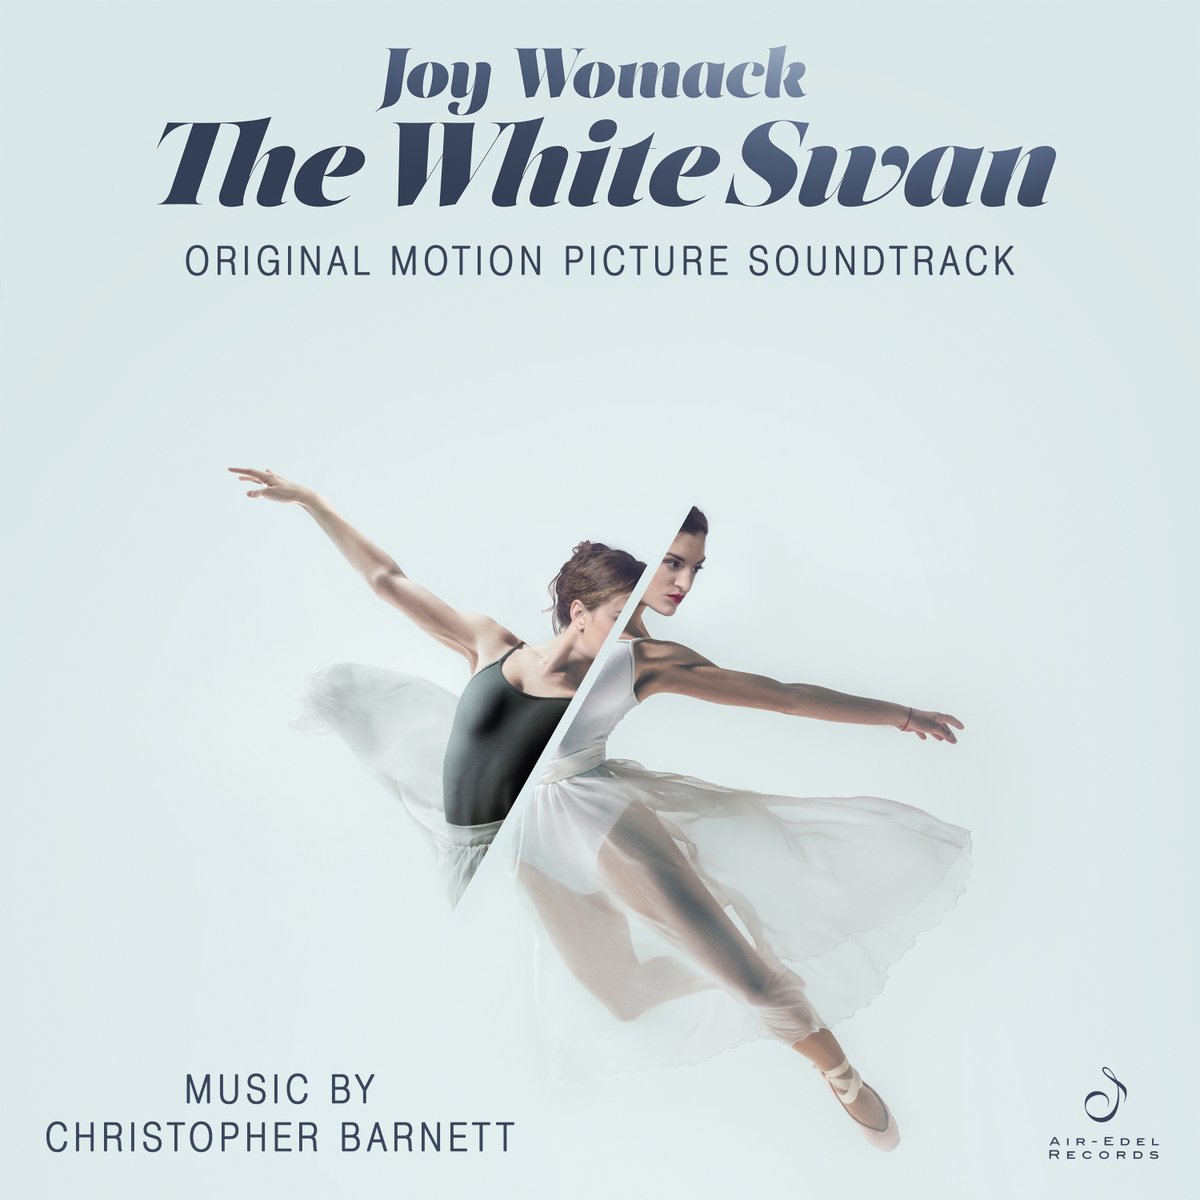 Marking their fourth collaboration with the award-winning composer Christopher Barnett, Air-Edel Records has released the soundtrack for Reason8 feature documentary ‘Joy Womack: The White Swan’, directed by Diana Burlis. Listen: airedelrecs.lnk.to/JoyWomack